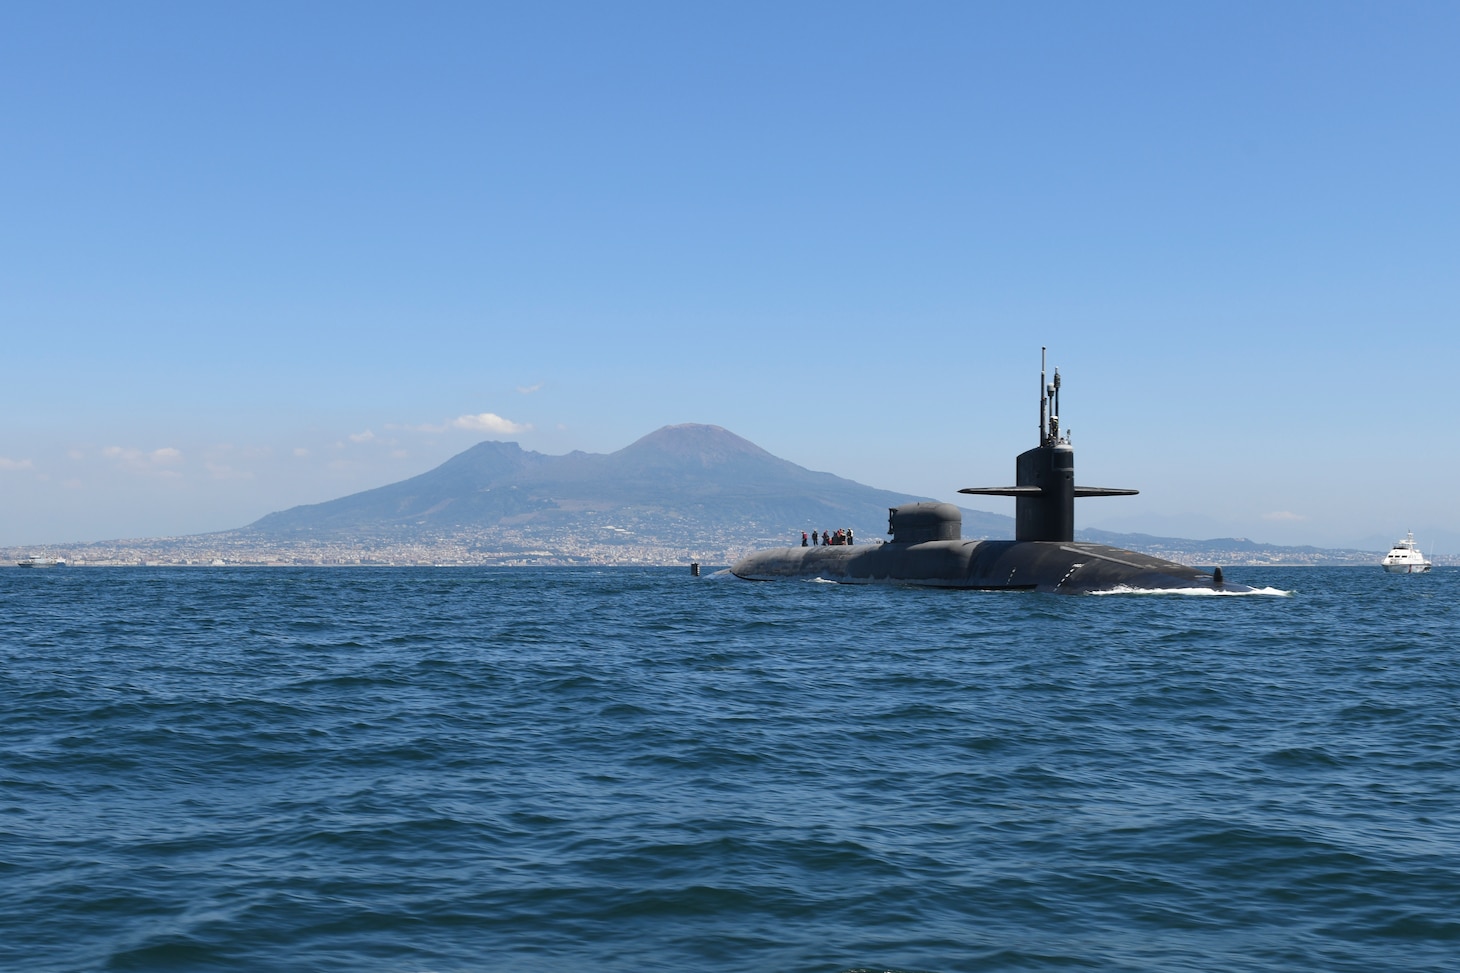 230804-N-ZV473-1021 NAPLES, Italy (Aug. 4, 2023) The Ohio-class guided-missile submarine USS Florida (SSGN 728) conducts a brief logistics stop in the Bay of Naples, in Naples, Italy, Aug. 4, 2023. The stop demonstrates the strength of the U.S.-Italy partnership as the two nations continue working together for a secure, stable & prosperous Europe. (U.S. Navy photo by Mass Communication Specialist 2nd Class Emily Casavant)